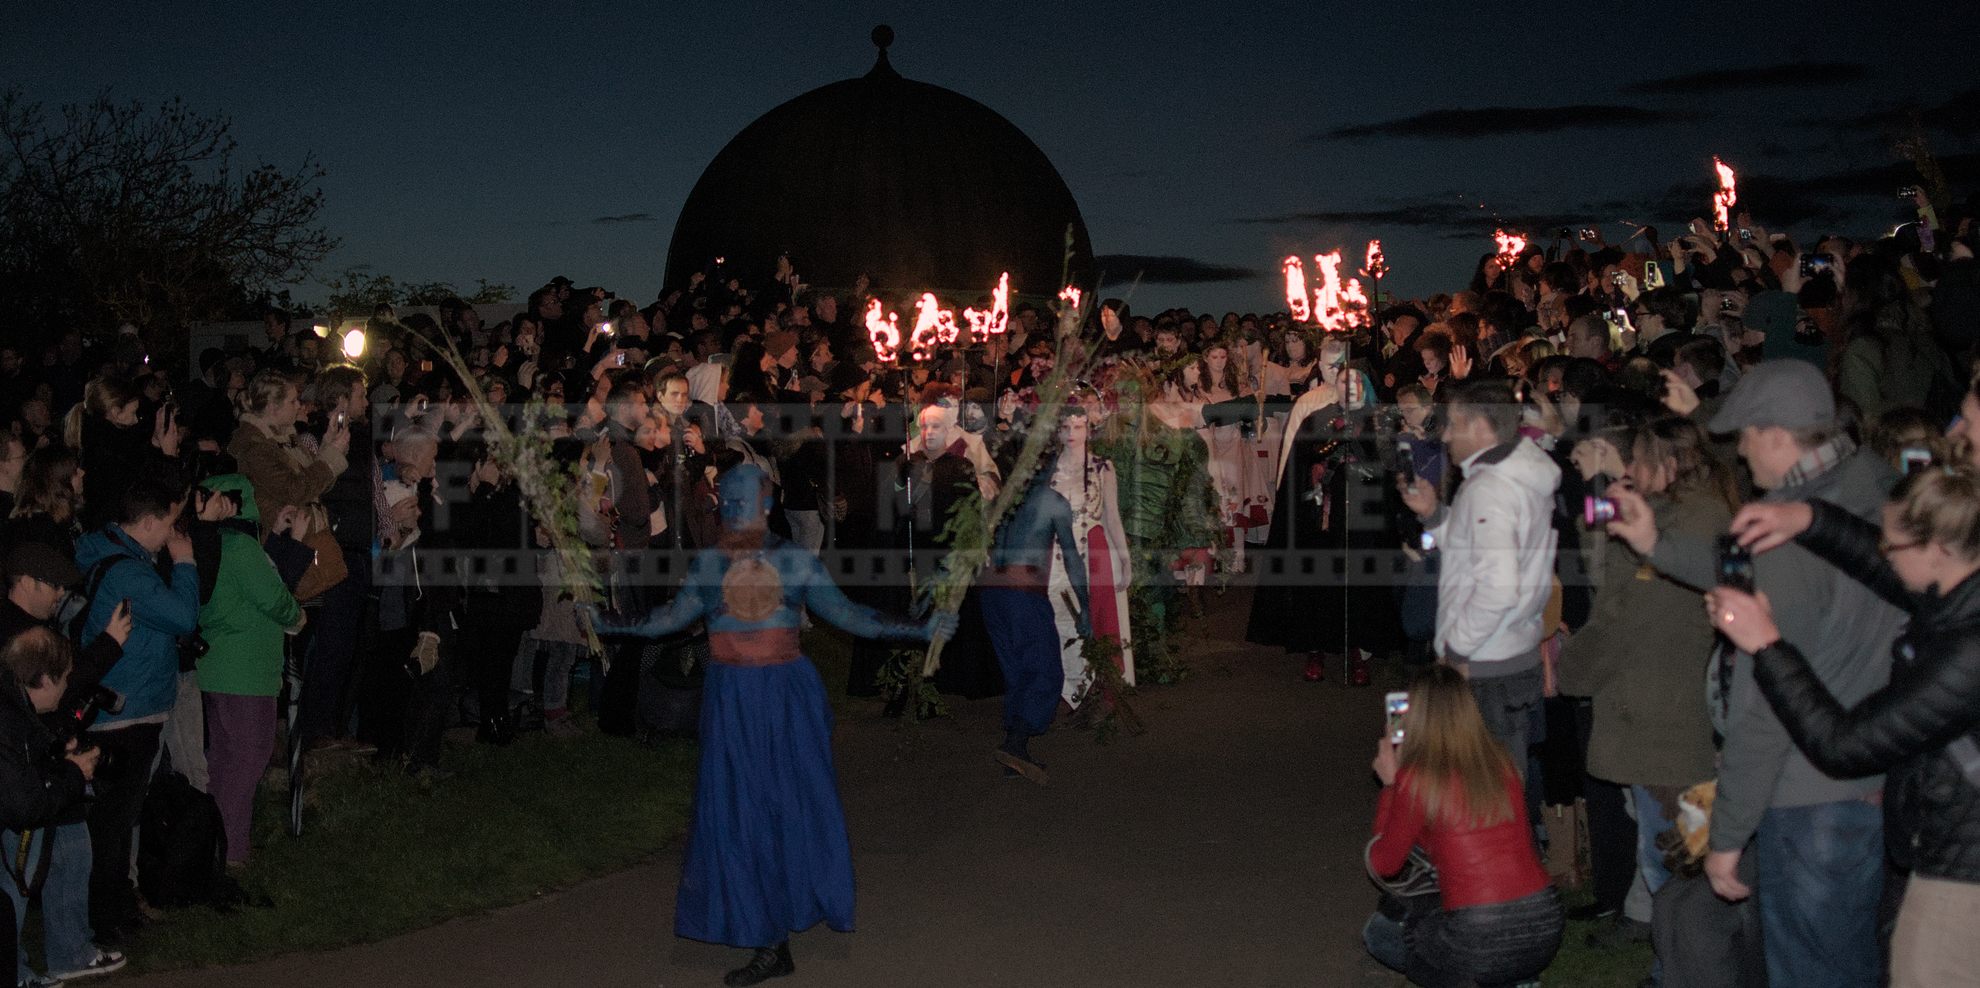 May Queen and Green Man lead the procession followed by the characters with torches